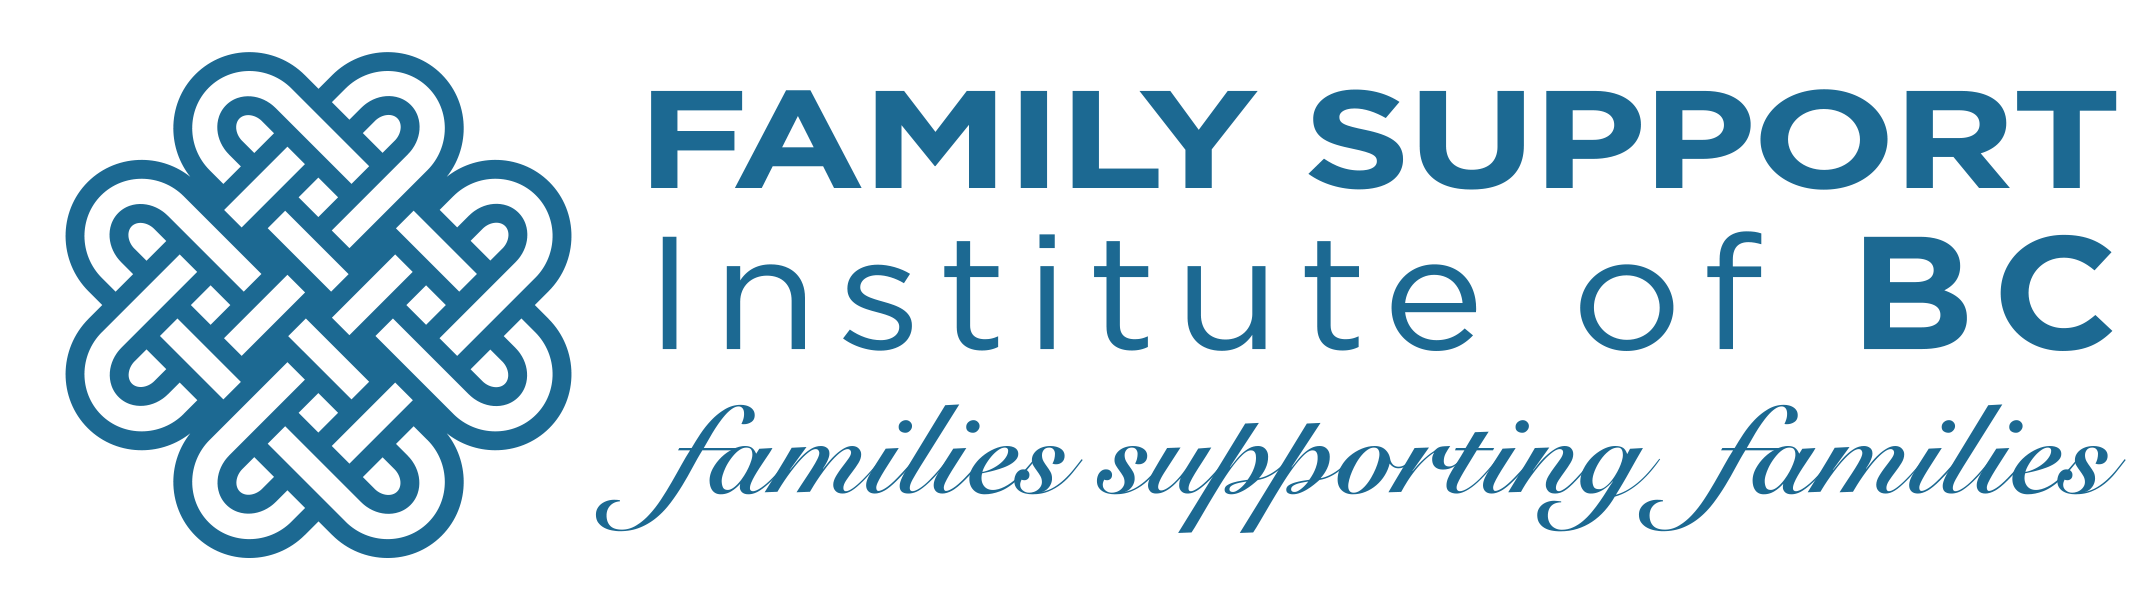 Family Support Institute of BC